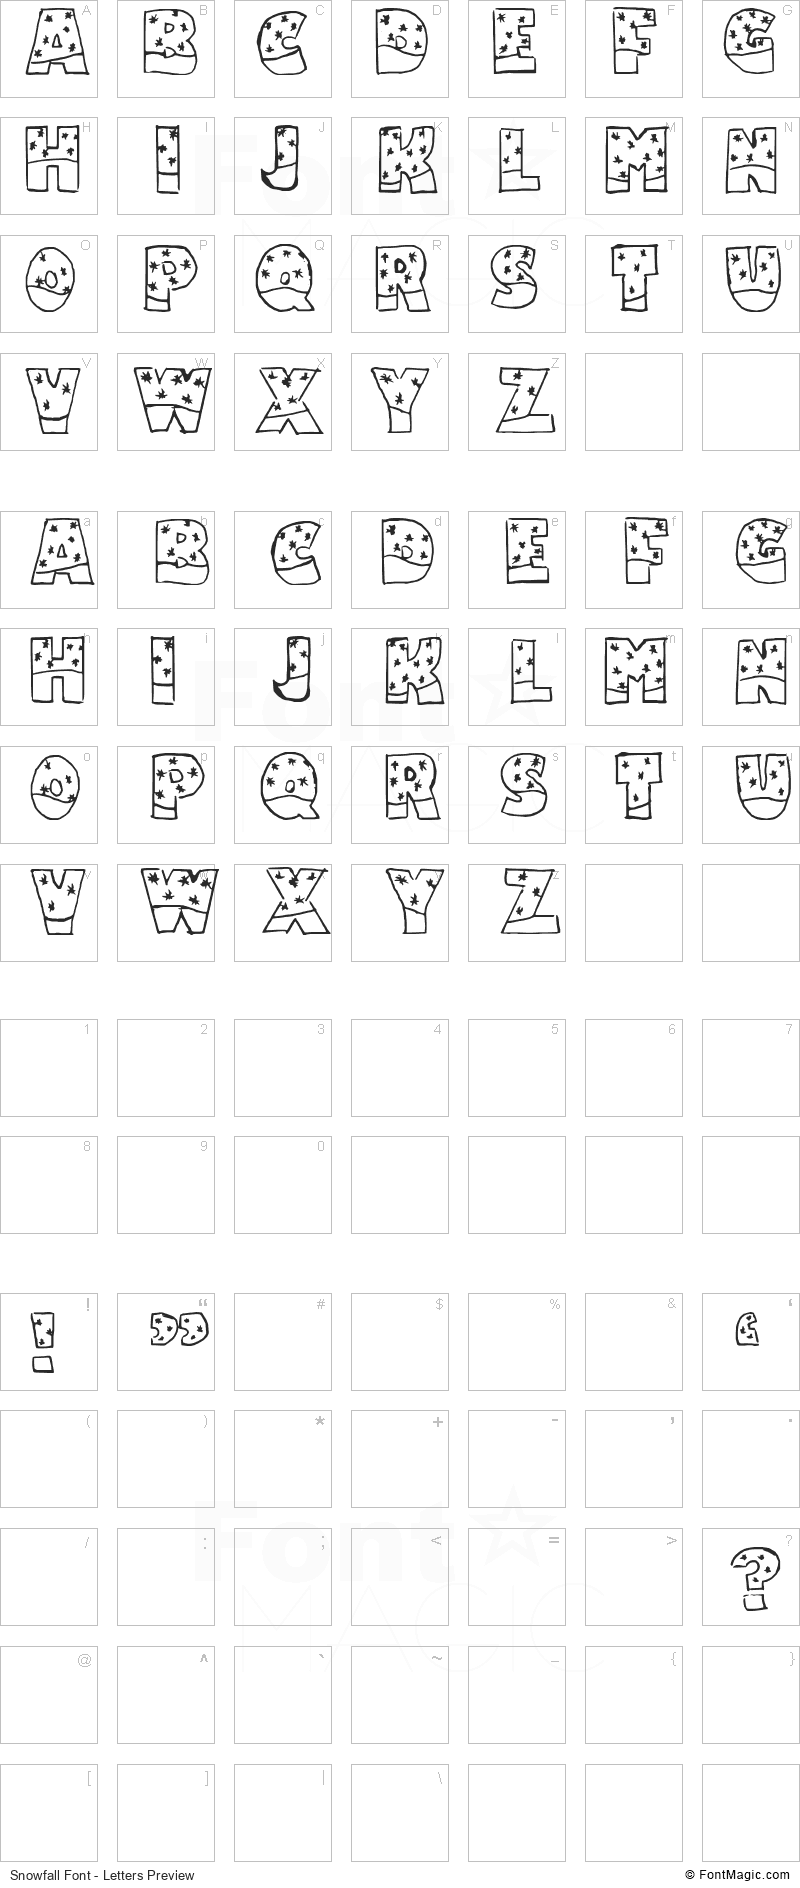 Snowfall Font - All Latters Preview Chart